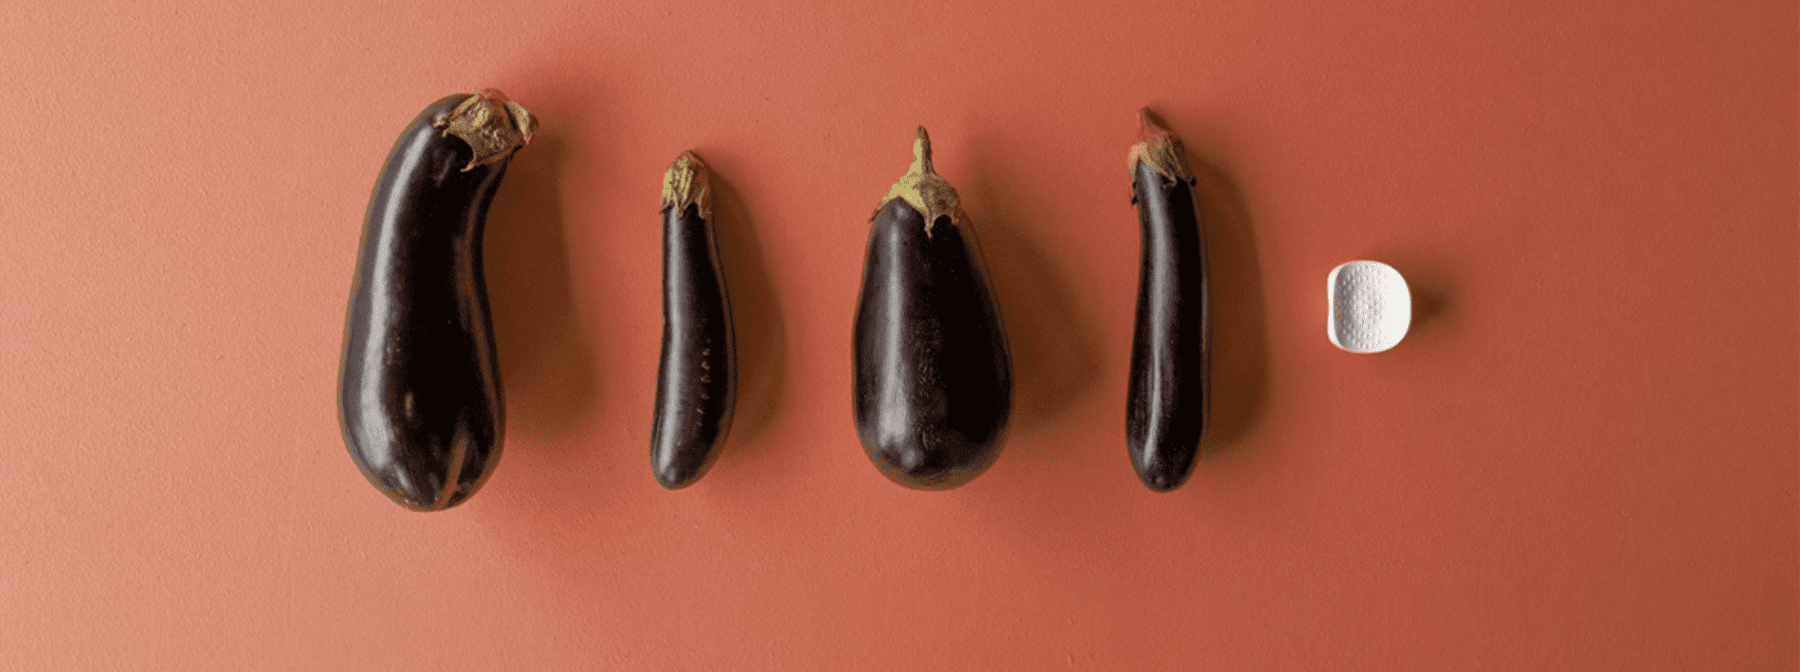 Does The Size Of My Penis Really Matter?